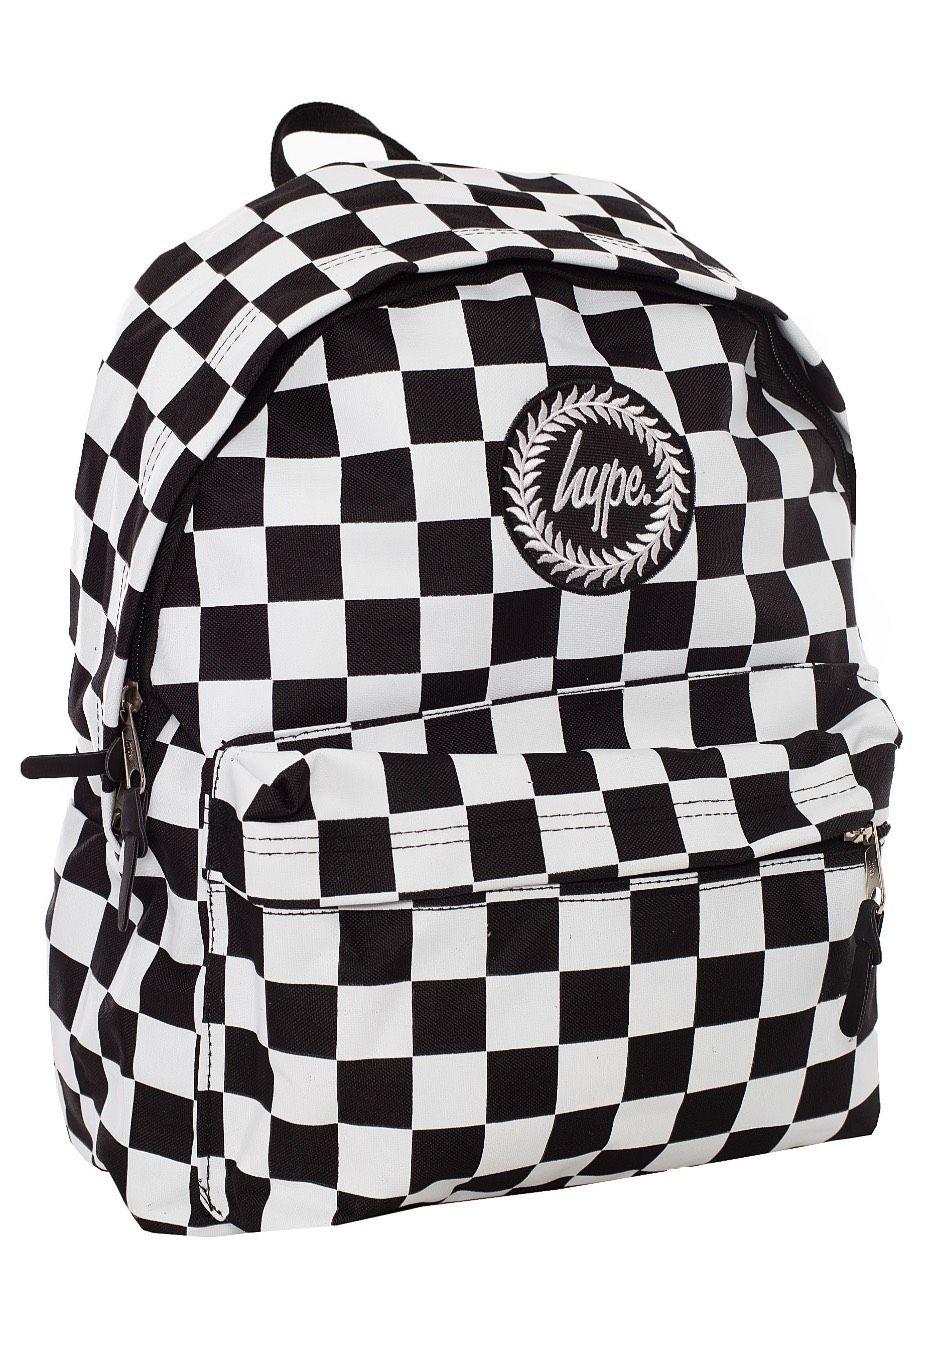 Black and White Checkerboard Logo - HYPE. - Checkerboard Black/White - Backpack - Streetwear Shop ...